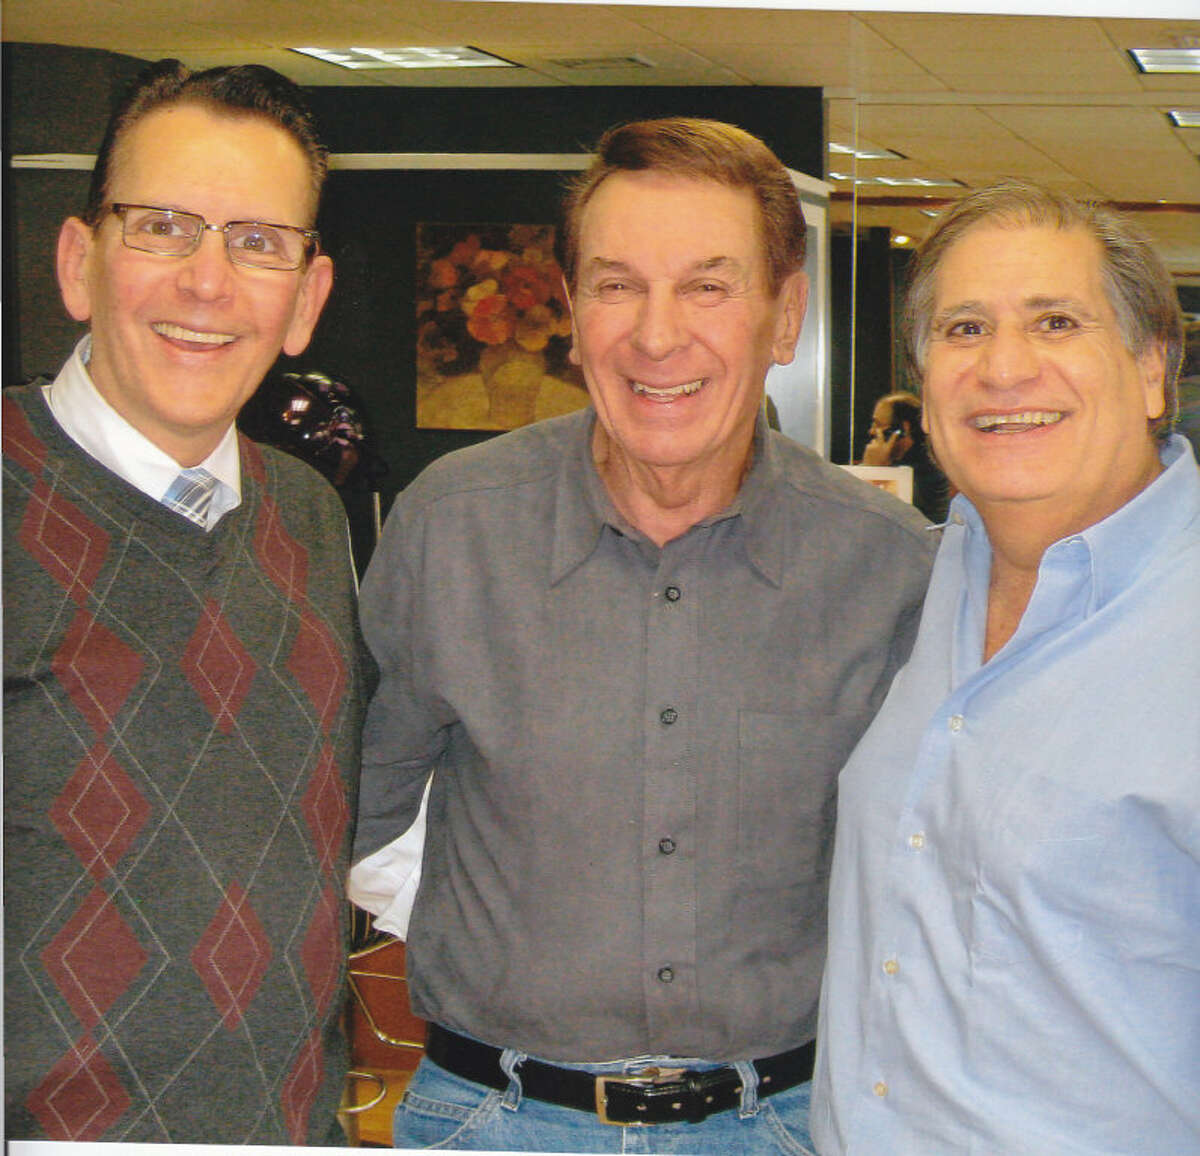 From left: Barry Silverman, singer Freddy "Boom Boom" Cannon and Guy Sasson. Cannon, a popular rocker from the 50s and 60s, made a surprise visit Jan. 15 to the Guy Sasson Hair Salon on High Ridge Road in Stamford.